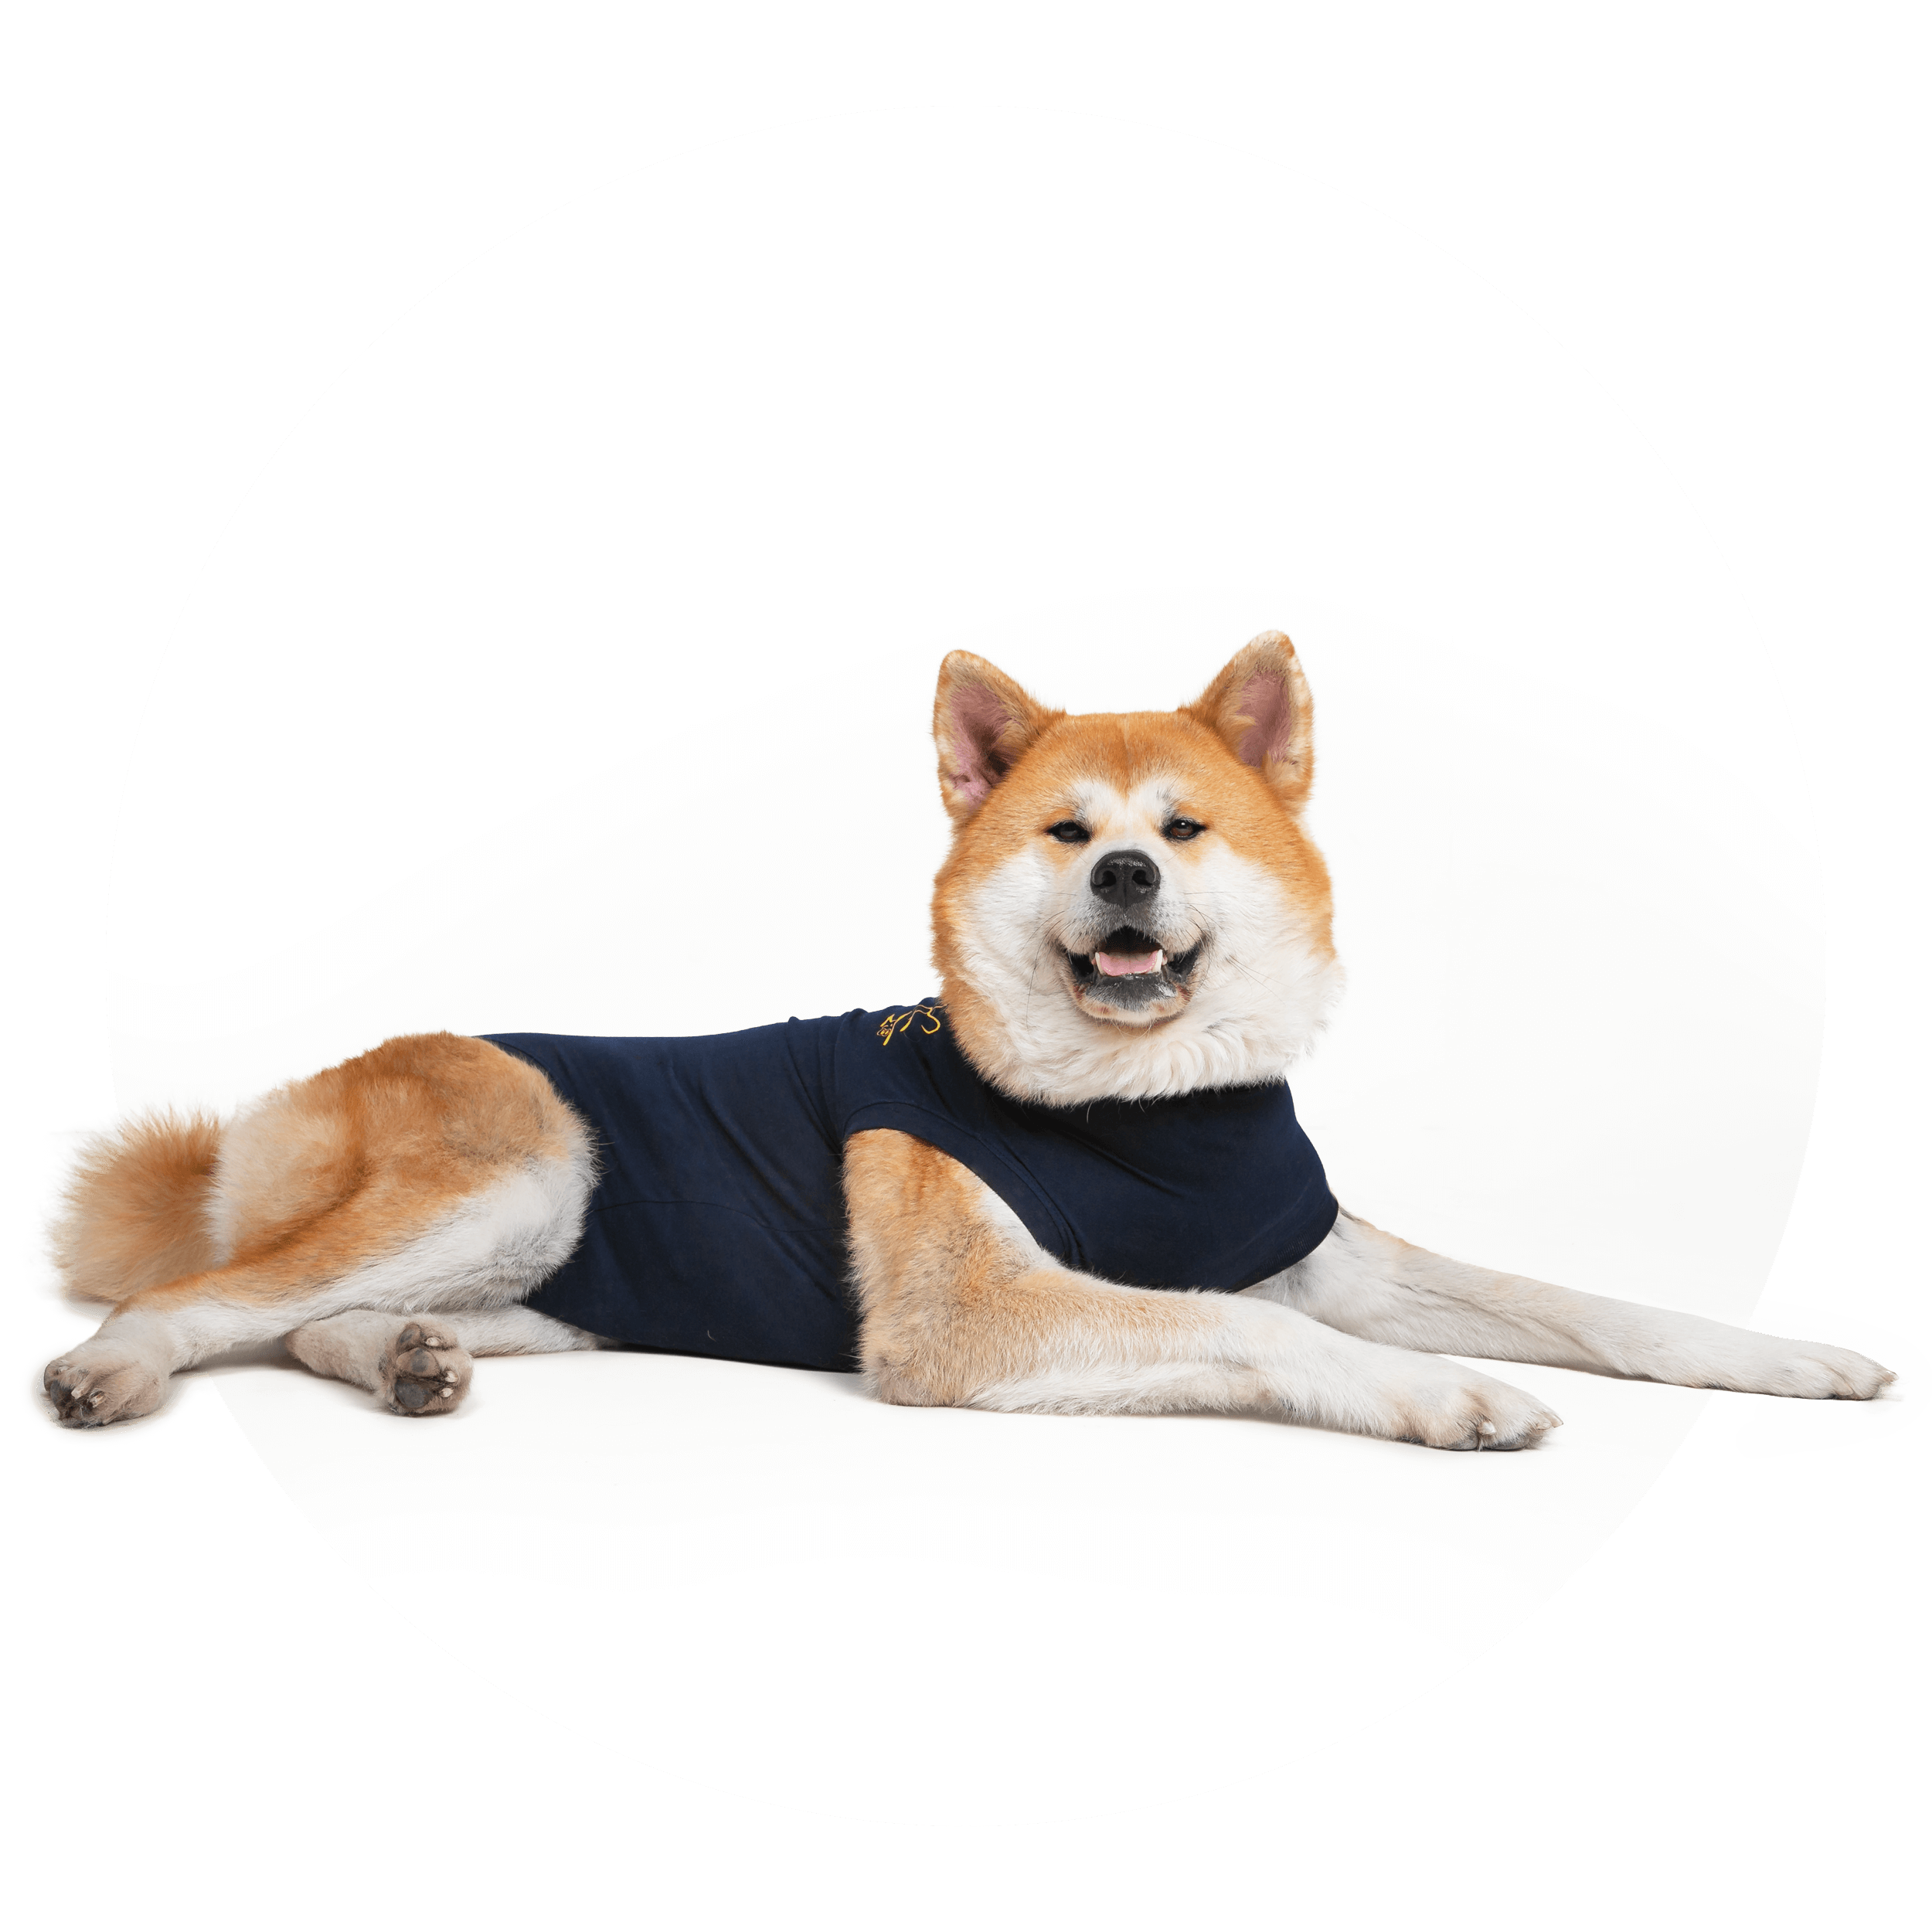 ©-MPS-CIRCLE-OVERVIEW-PROTECTIVE-BODY-SHIRT.DOG-05-V01.2019-1.png